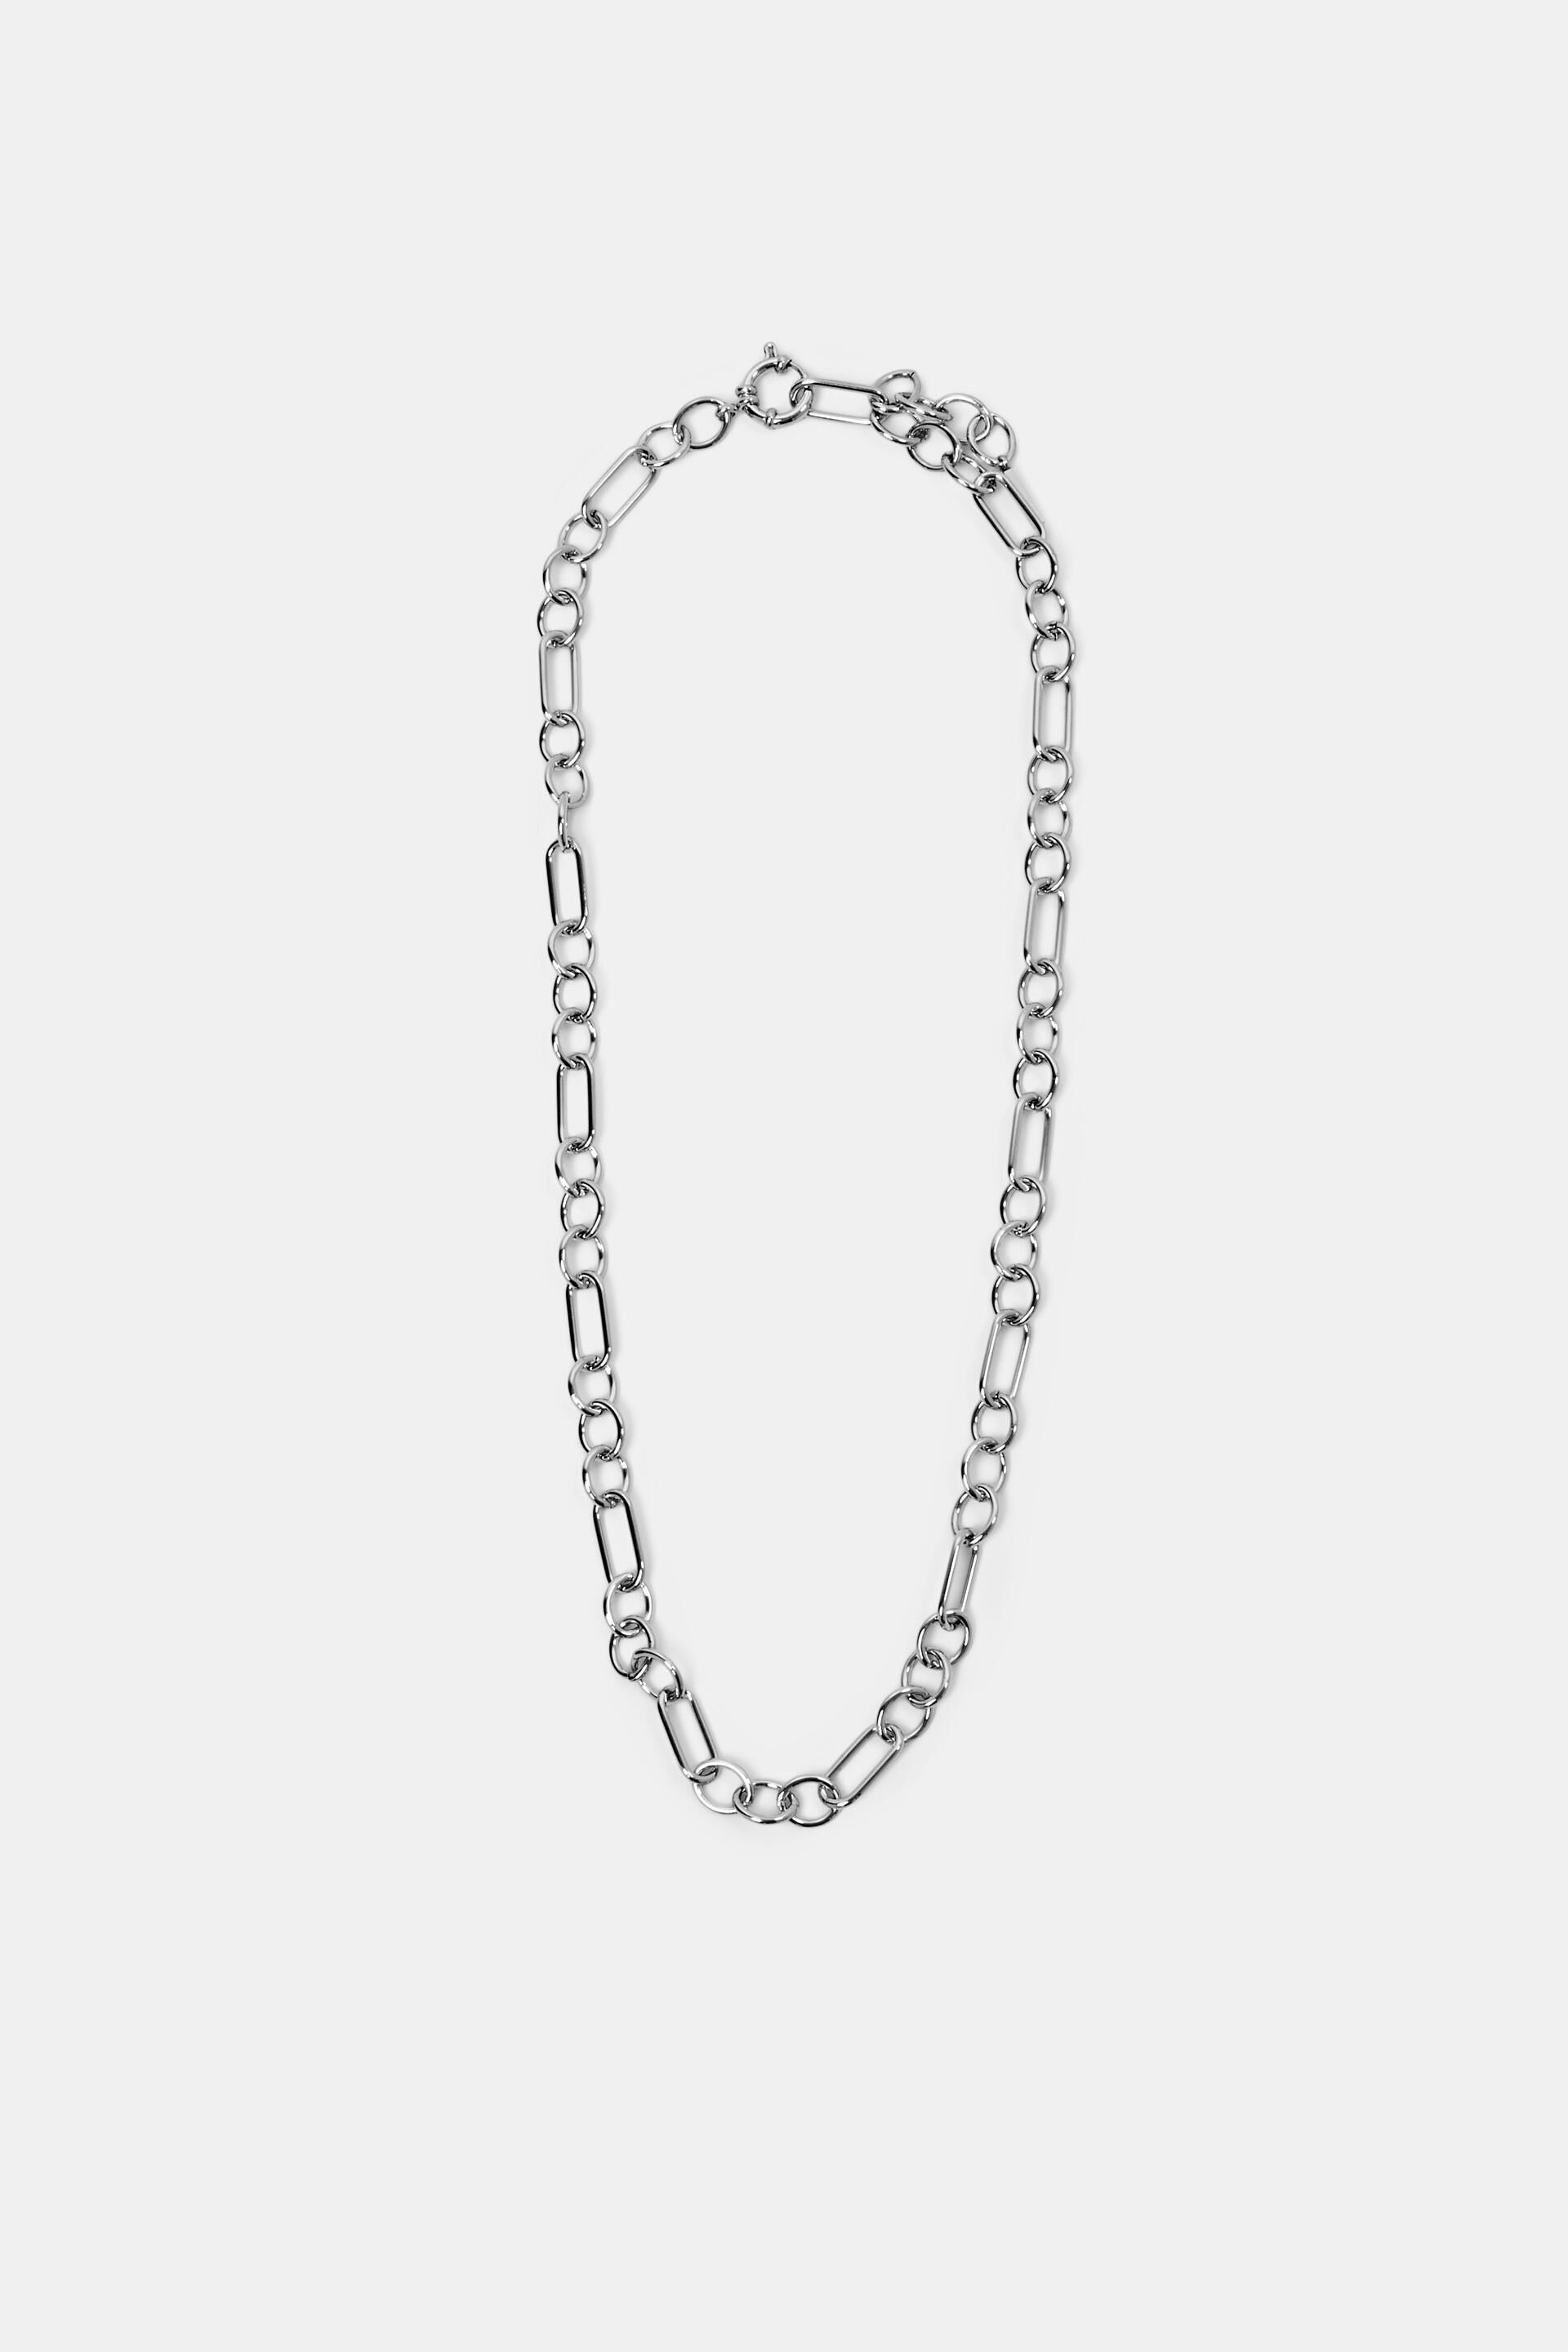 Esprit steel stainless Chain necklace,